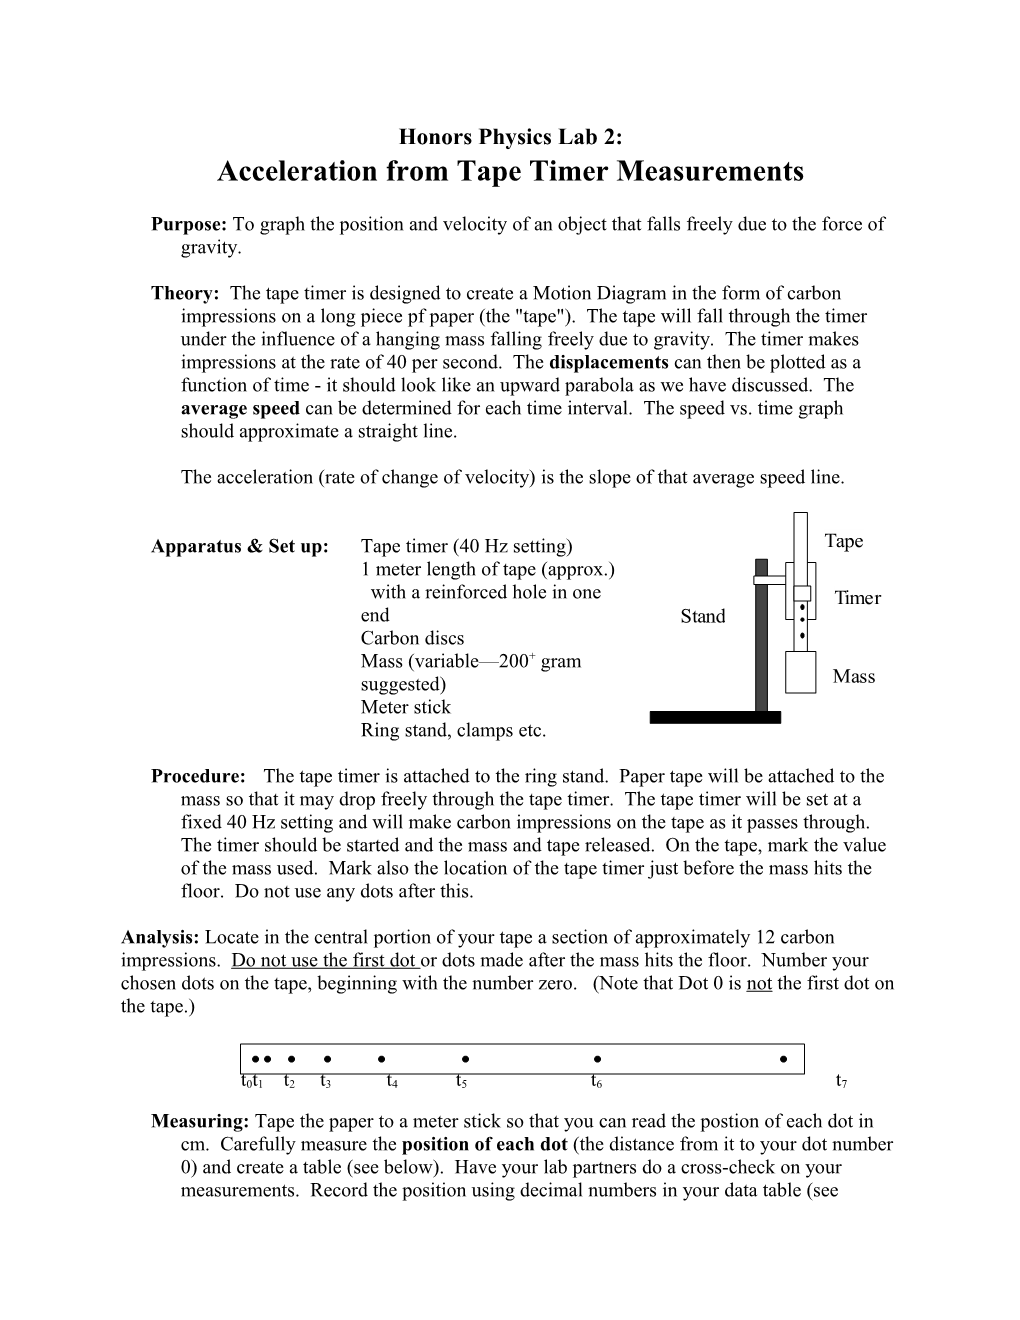 Experiment 1: Acceleration from Tape Timer Measurements